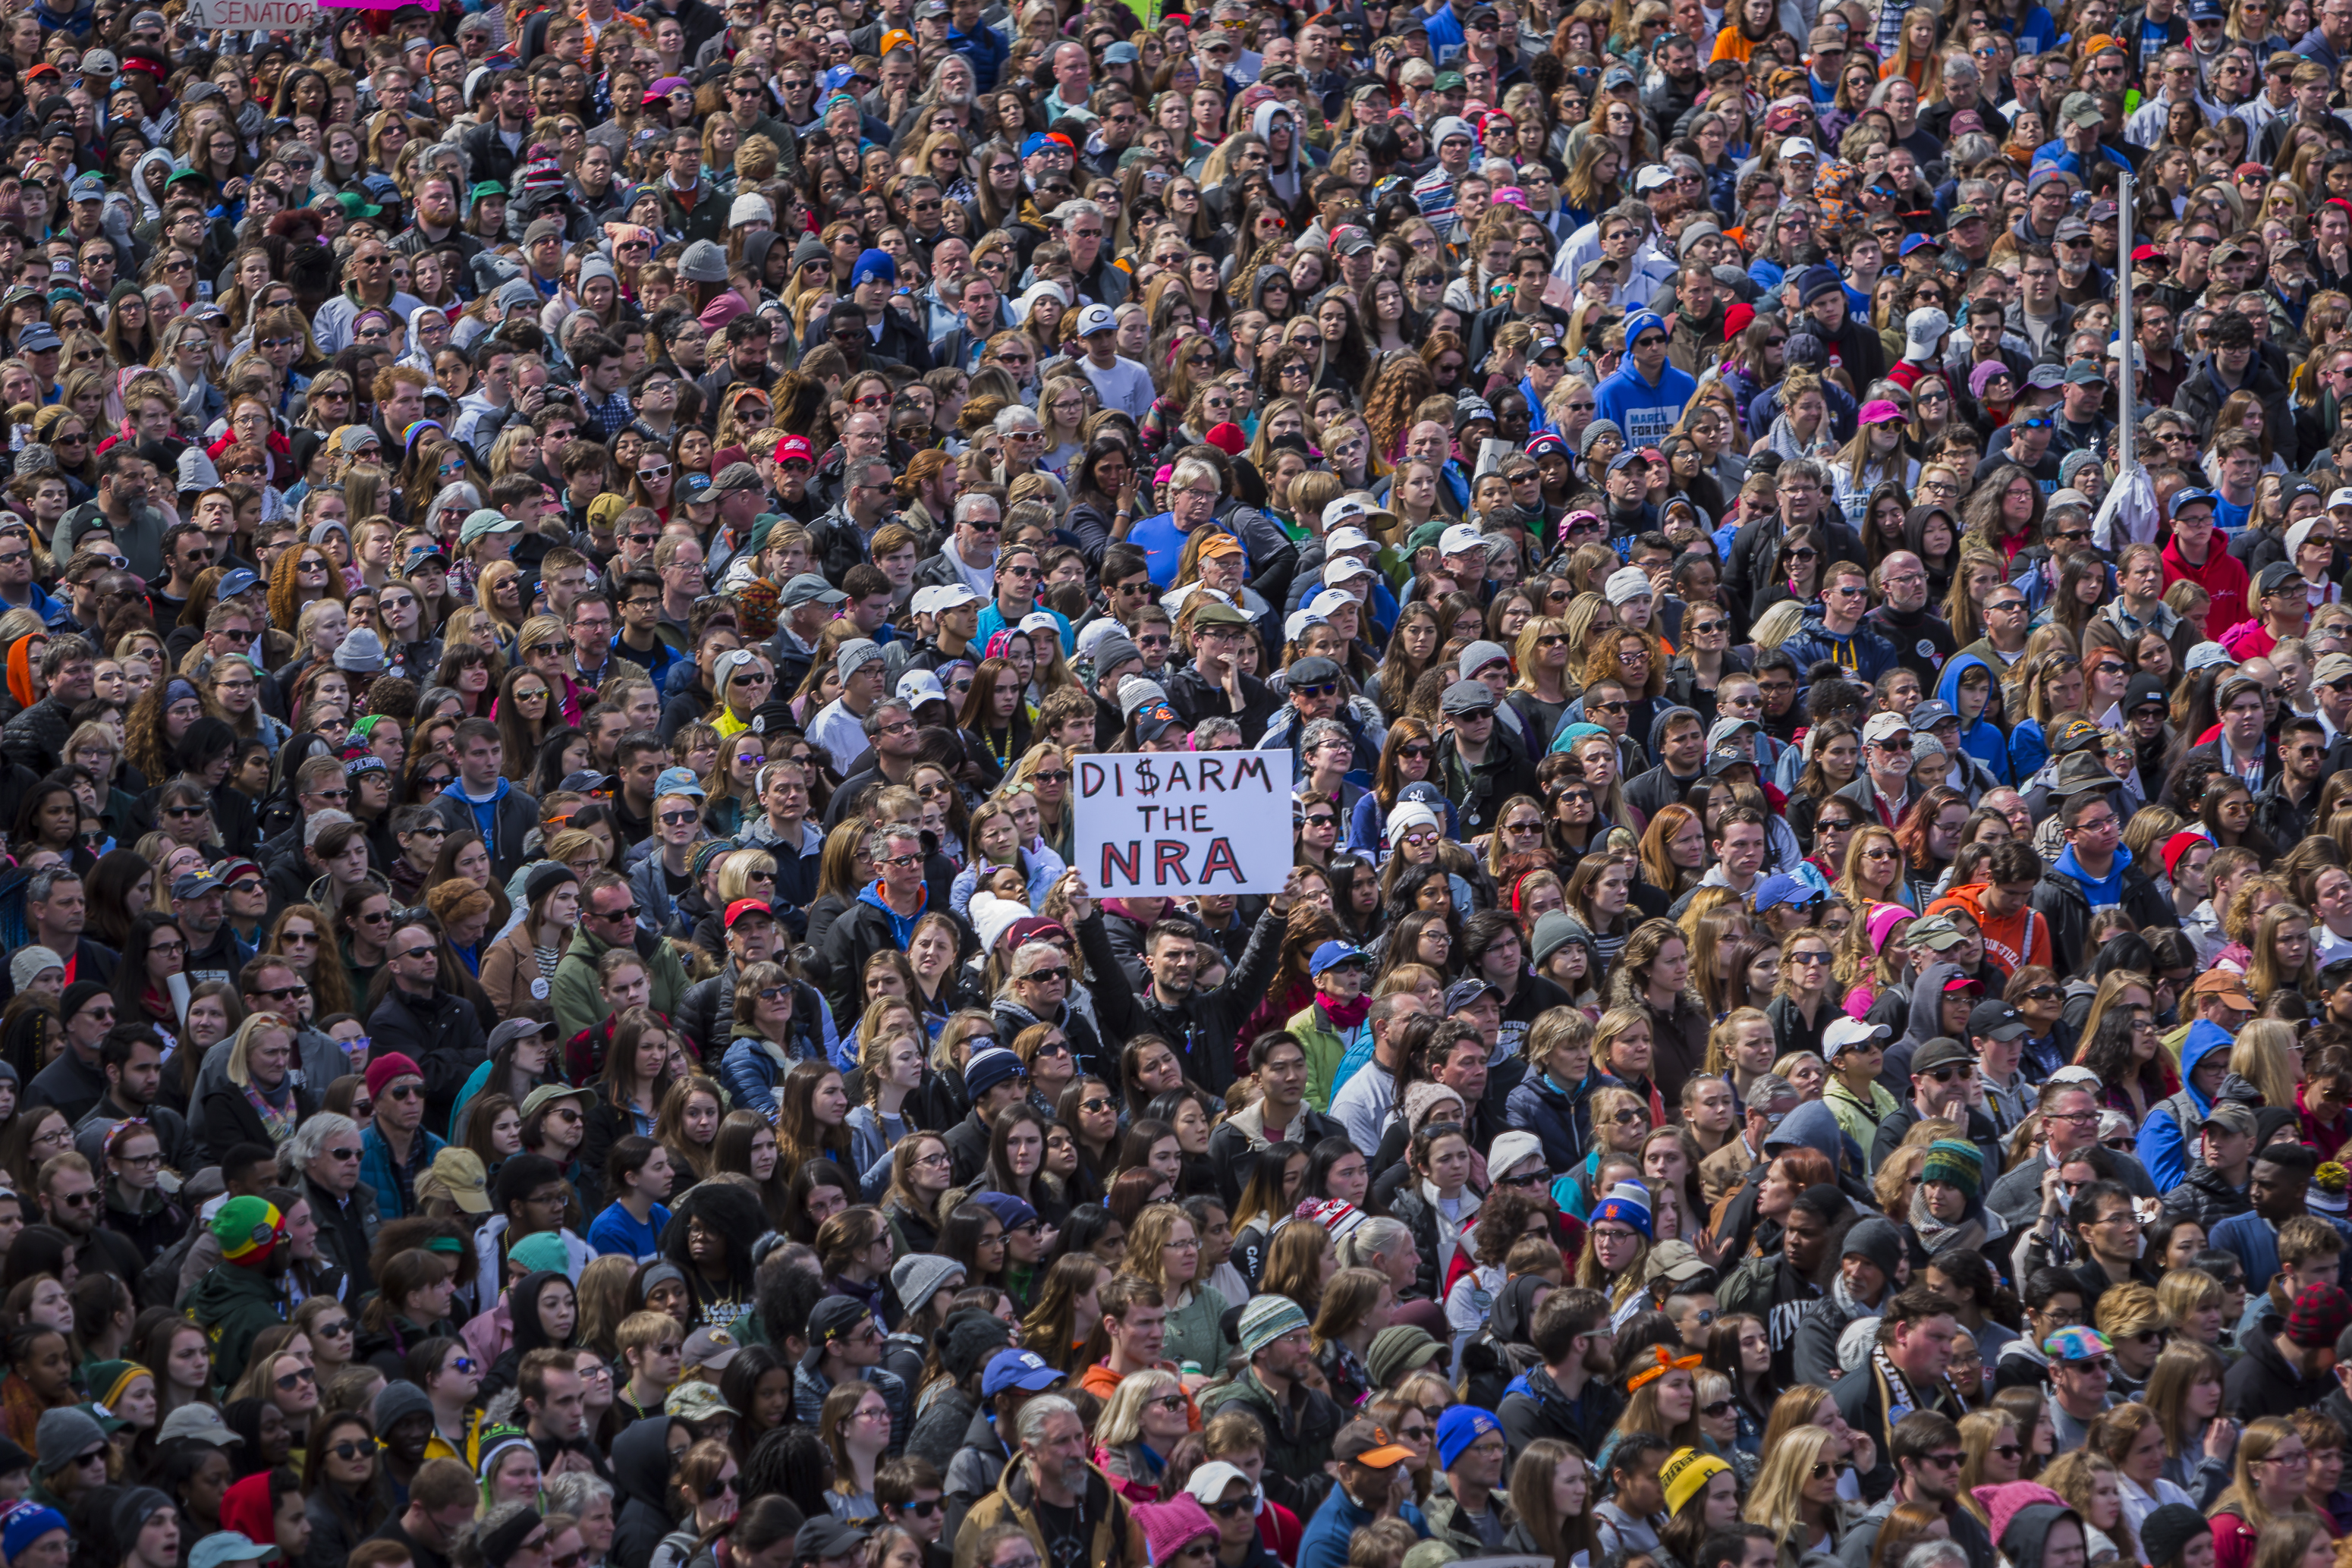 Students from Marjory Stoneman Douglas High School in Florida, the scene of a mass shooting Feb. 14, were joined by over 800 thousand people as they march in a nationwide protest demanding sensible gun control laws. (Pacific Press - LightRocket via Getty Images)